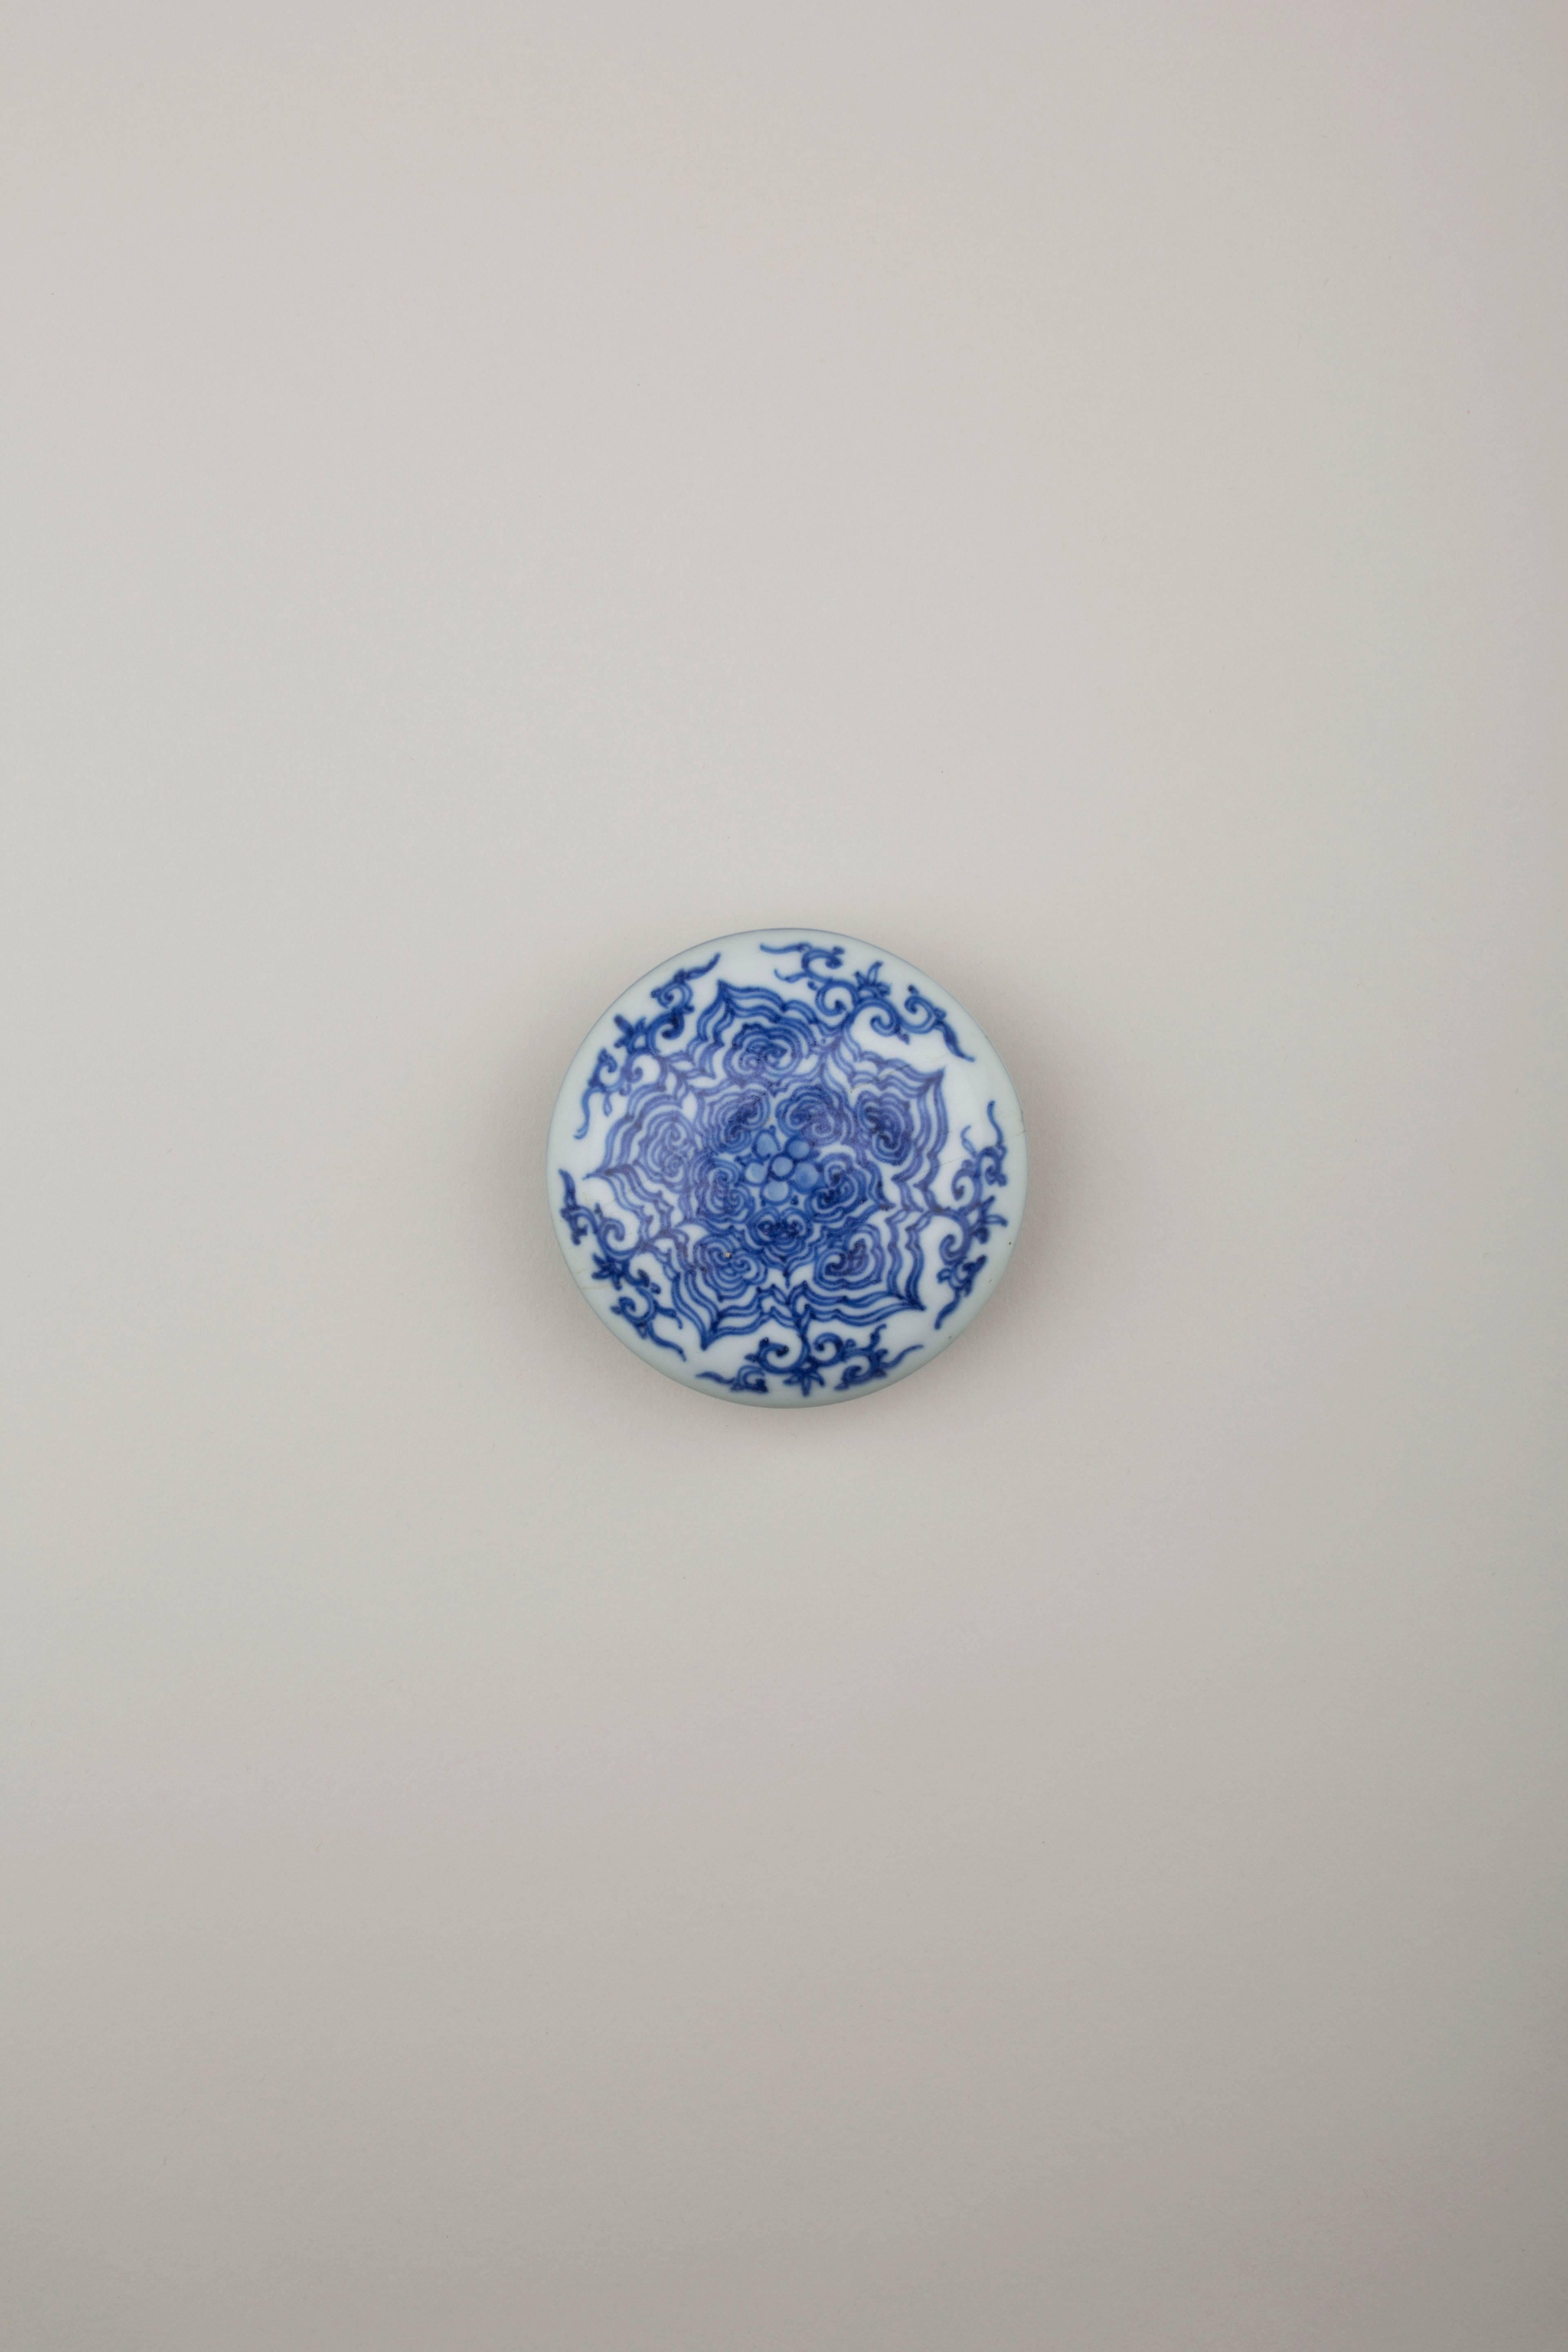 Chinese porcelain blue and white circular soft paste box painted in underglazed blue with a stylised floral design on the cover, the underneath with two floral sprays, the interior glazed white.

Kangxi, circa 1645

Diameter: 8.3 cm

Formerly